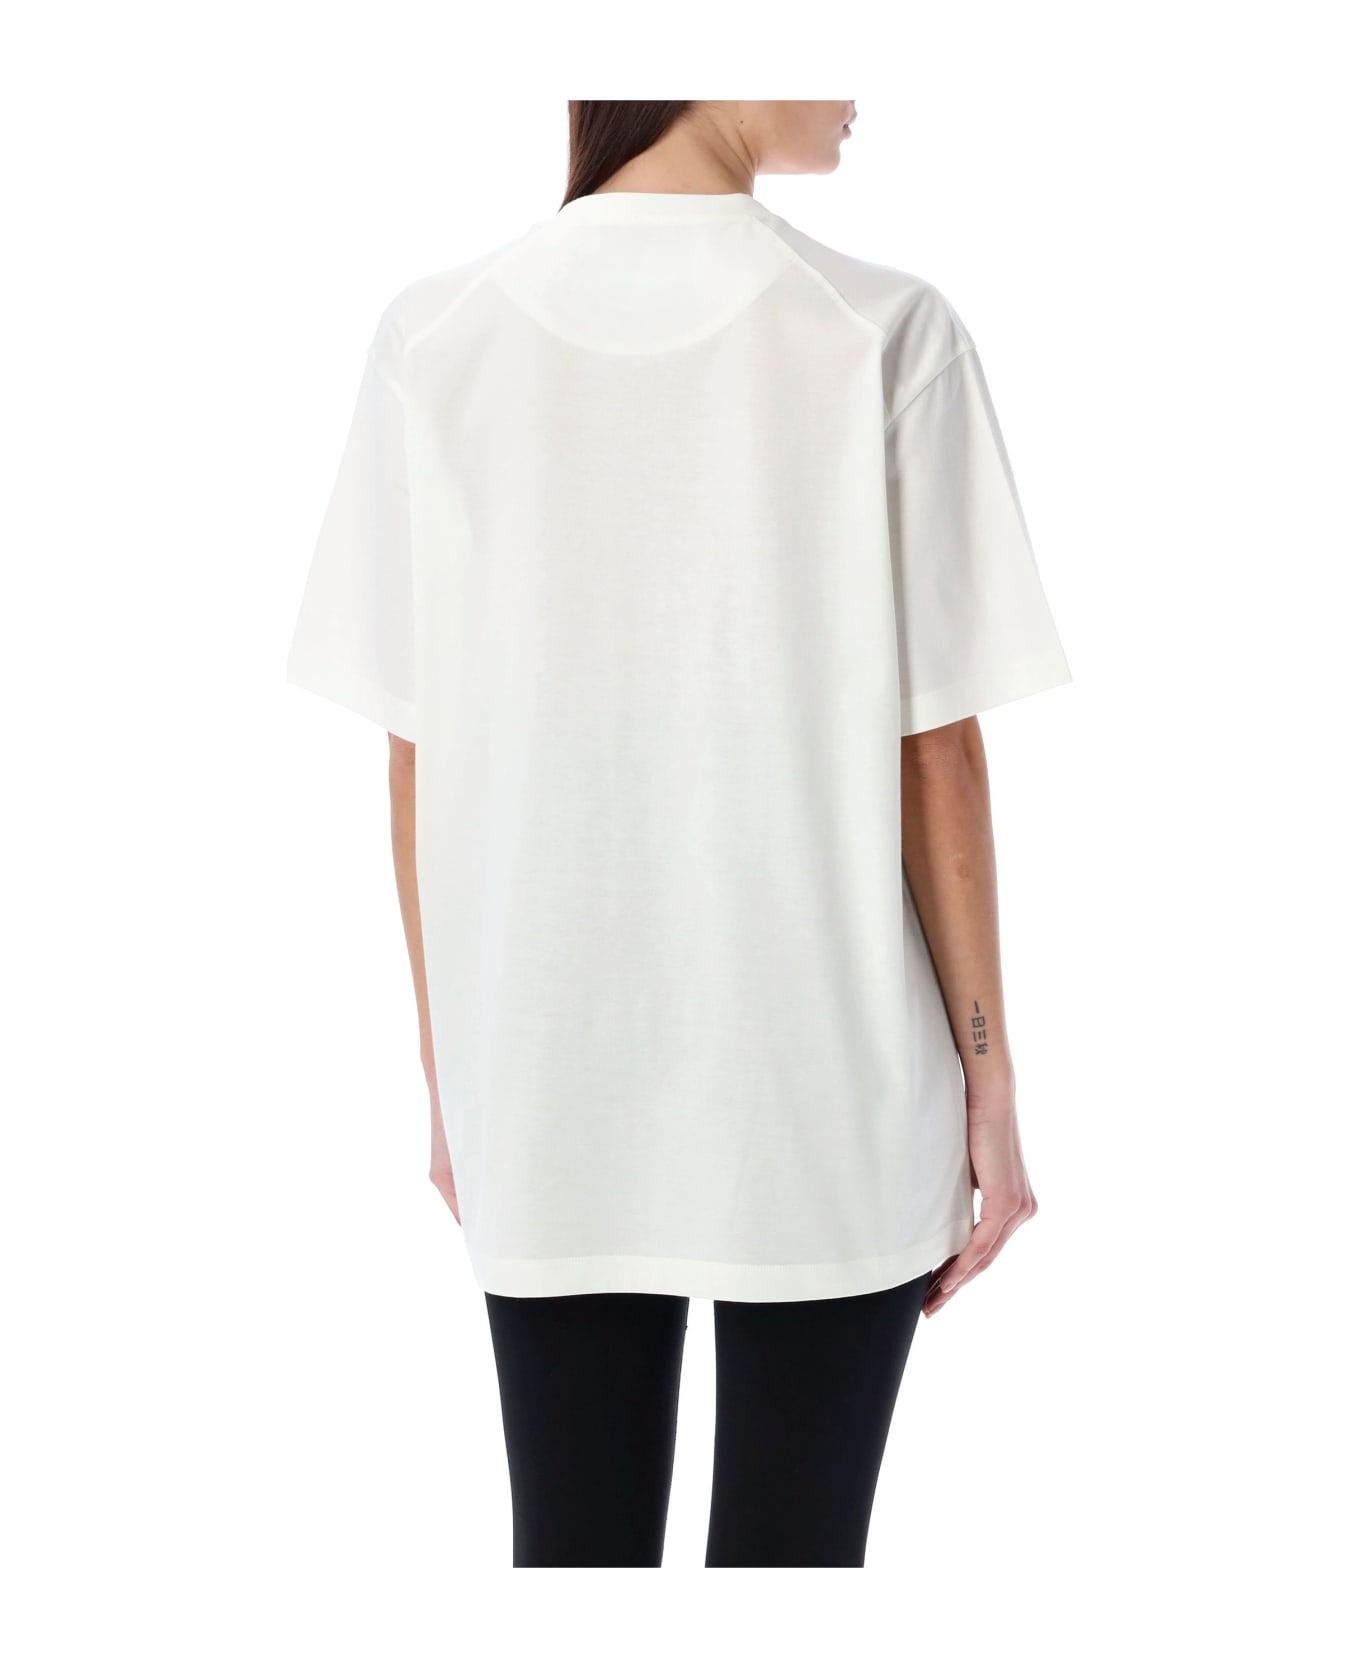 Y-3 Graphic Short Sleeves Tee - WHITE